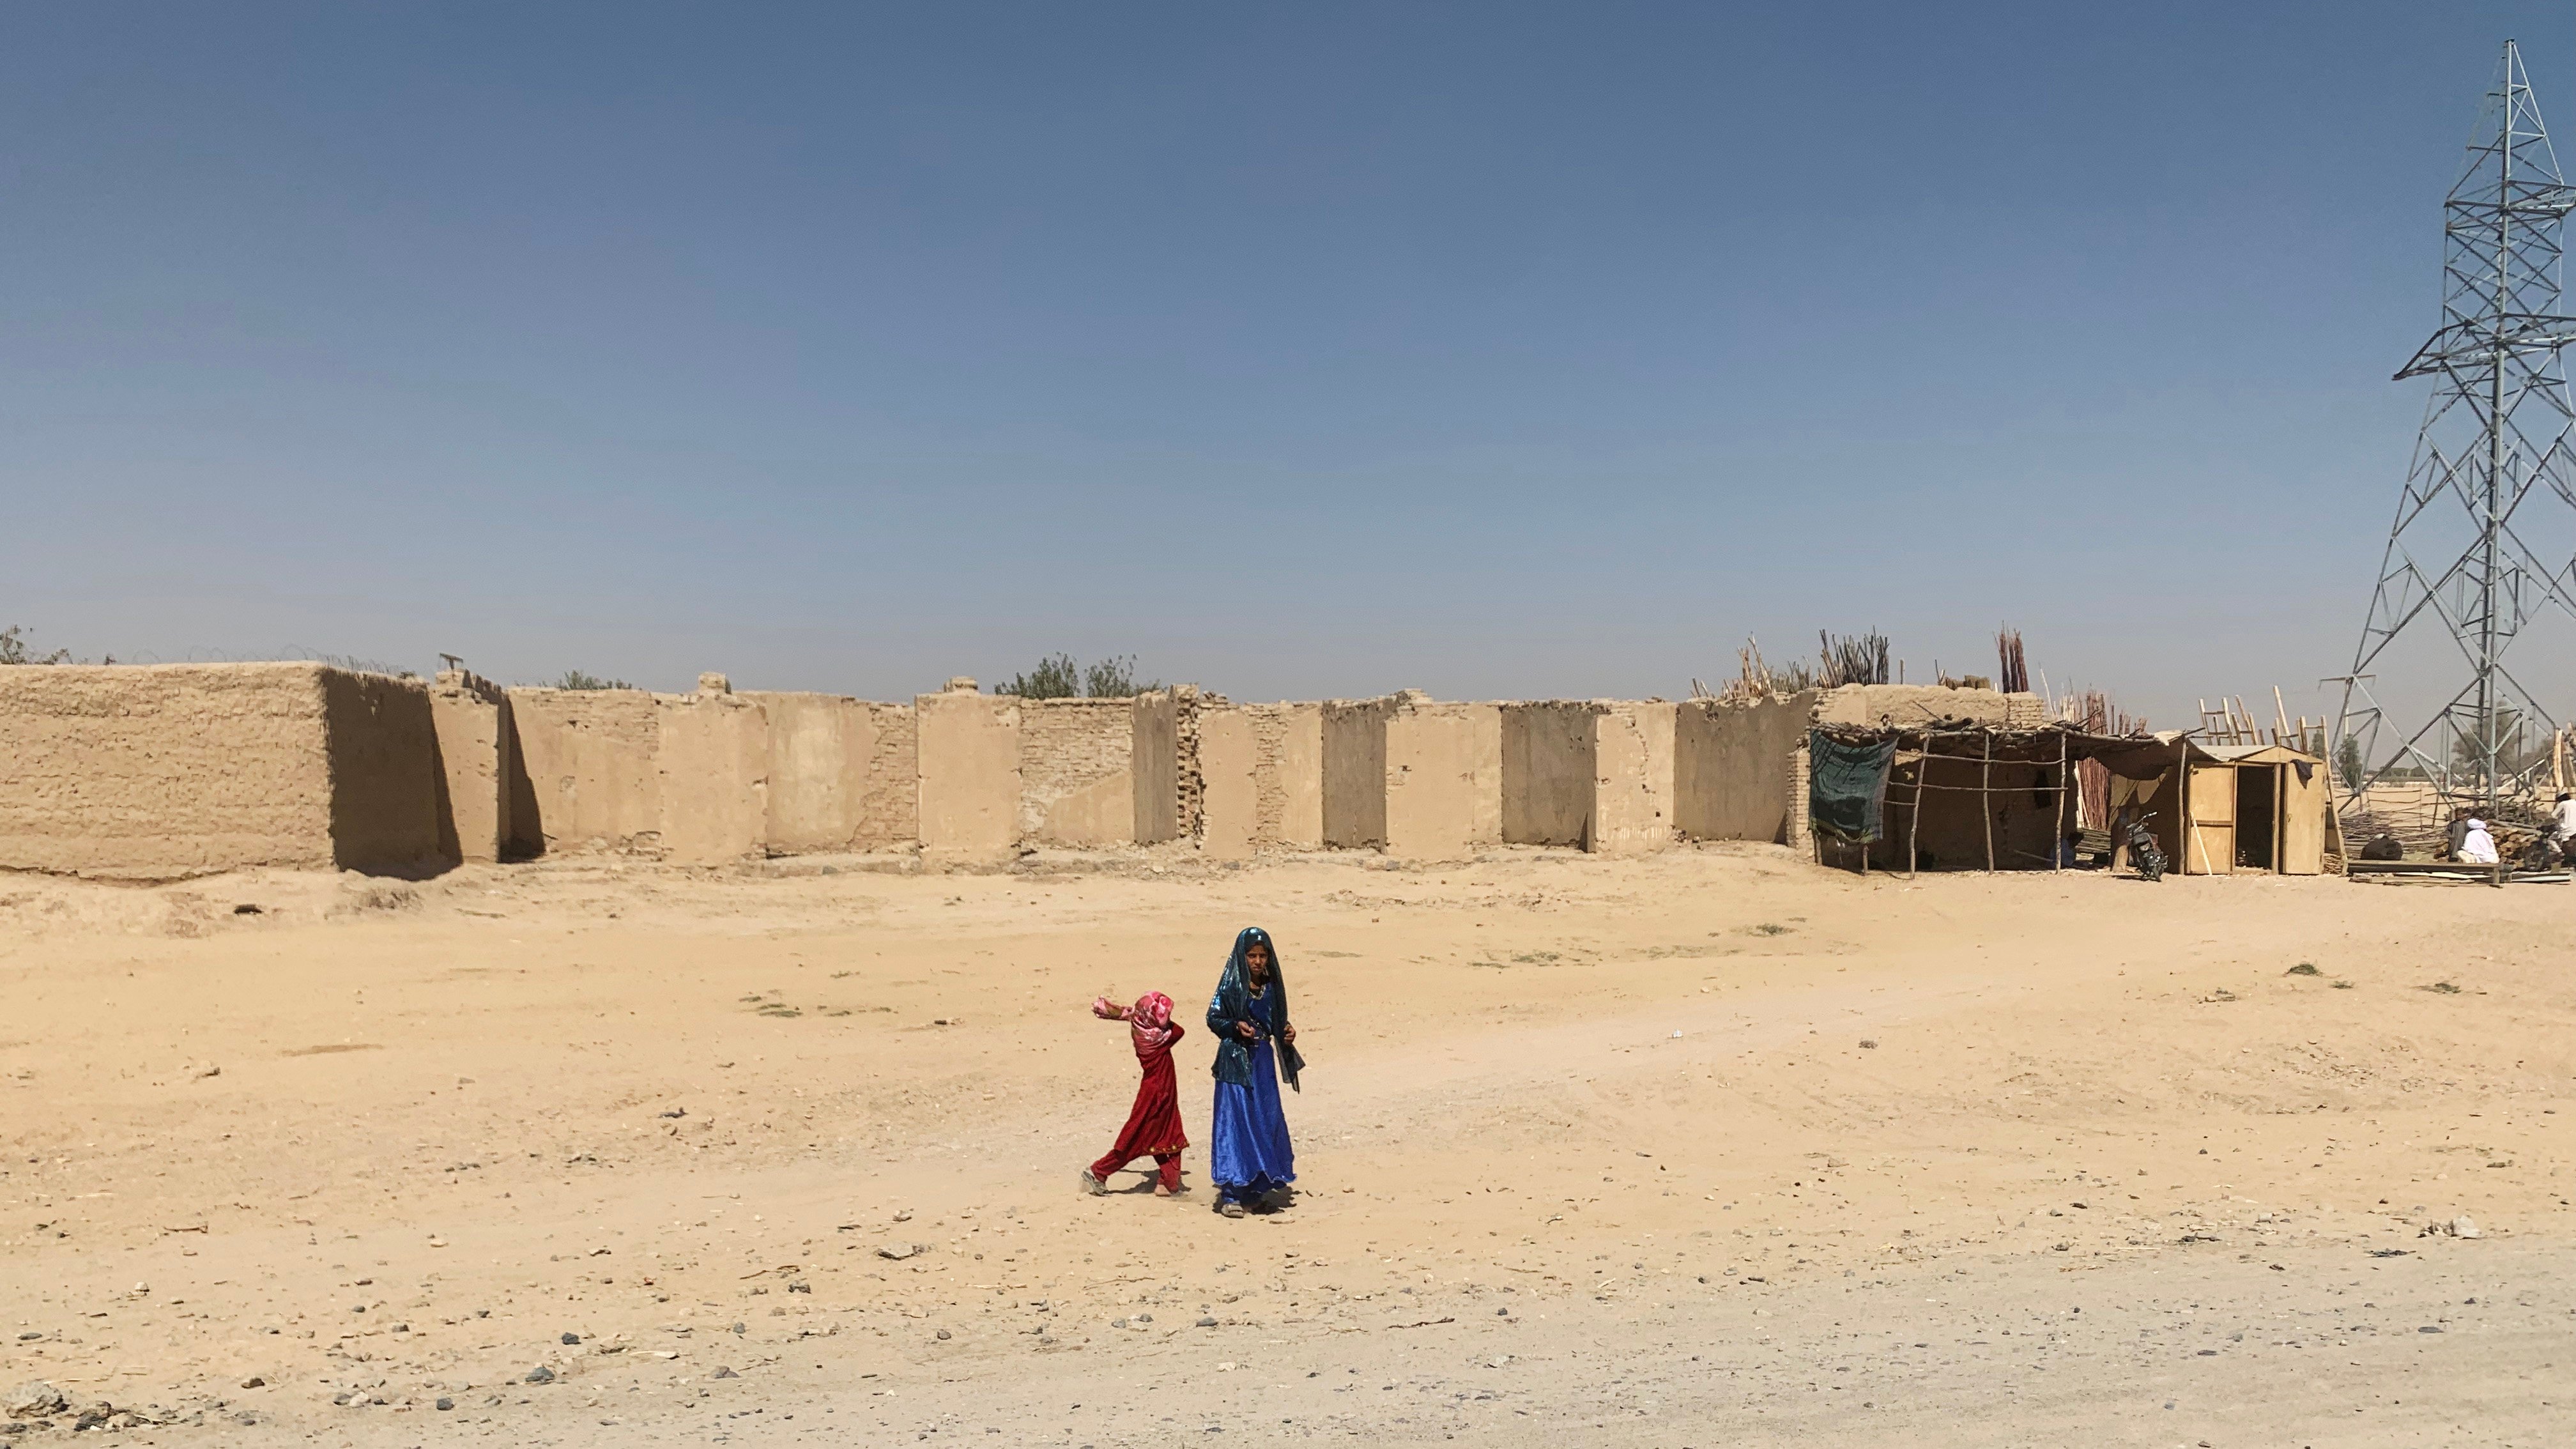 Two girls outside a compound in Kandahar province, Afghanistan. The Taliban are in dire need of foreign aid to fix their war-torn country, but their anti-female laws make them a pariah to the detriment of millions of Afghans. Photo: Lindsey Kennedy